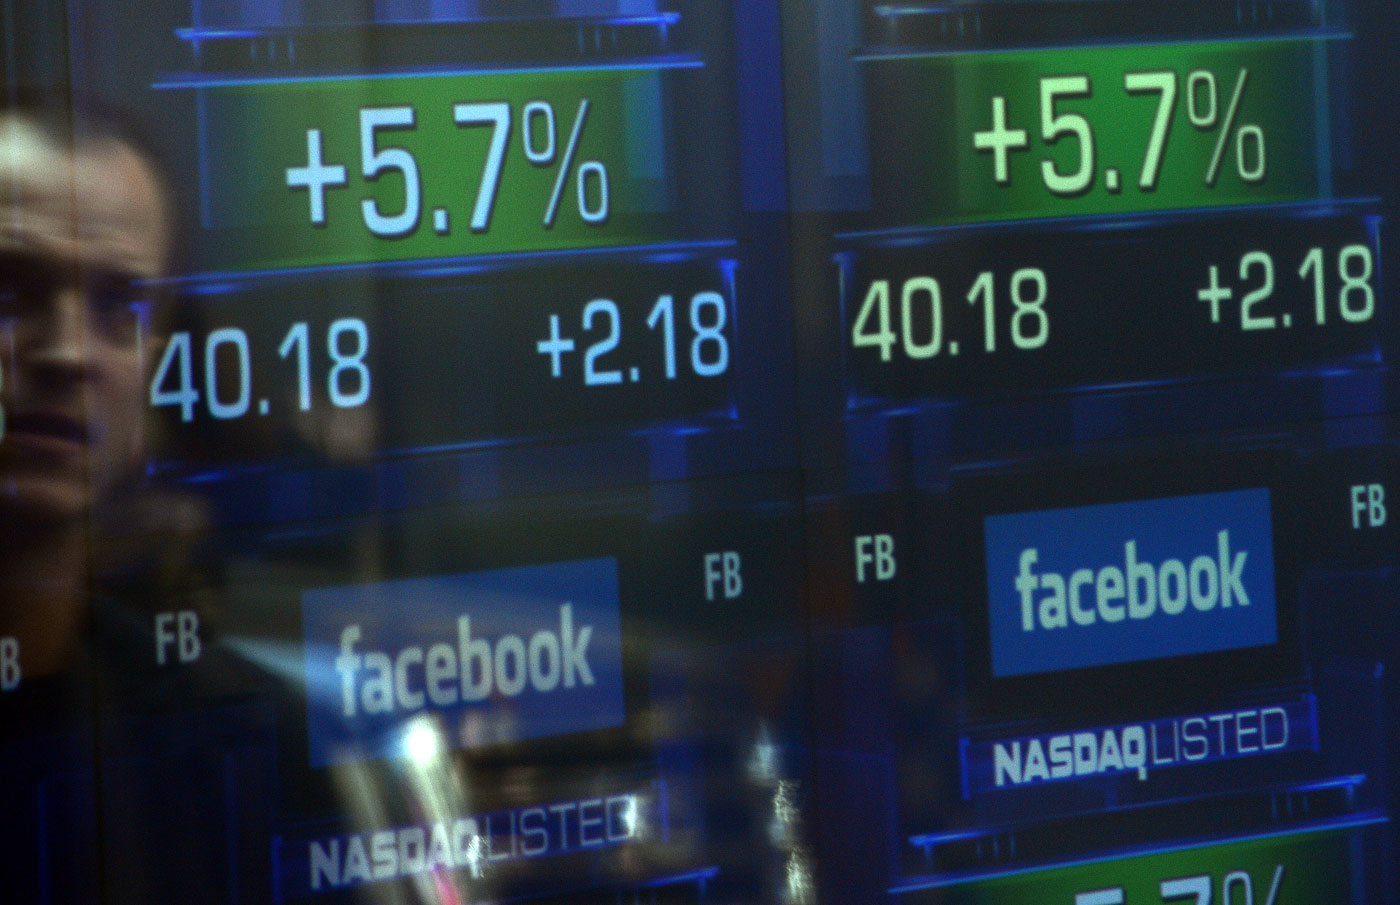 PHOTO: Screens display the start of trading in Facebook shares at the NASDAQ stock exchange in Times Square in New York, May 18, 2012.